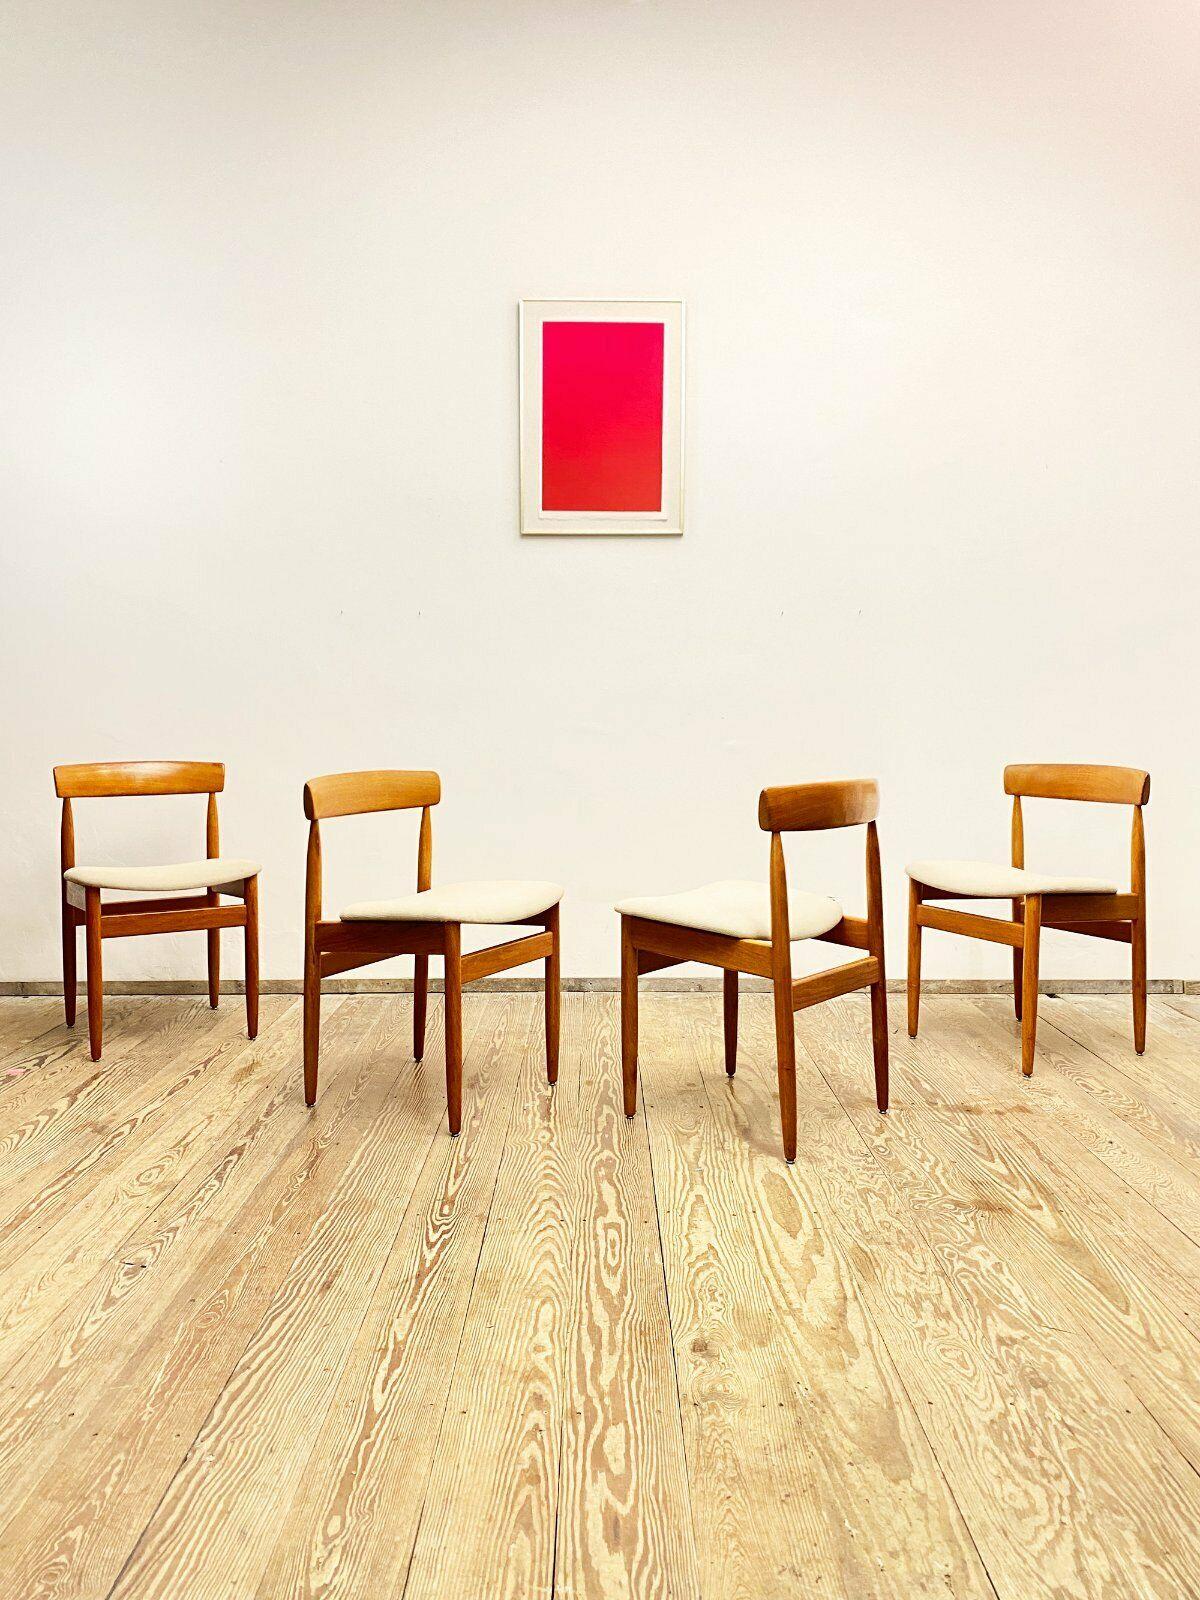 Dimensions: 43 x 46 x 75 x 44 cm (width x depth x height).

This set of dining chairs was manufactured in the 60s by Farsö Stolefabrik in Denmark. The set features 4 chairs made out of teak wood and seats with woolen upholstery. 

The wooden